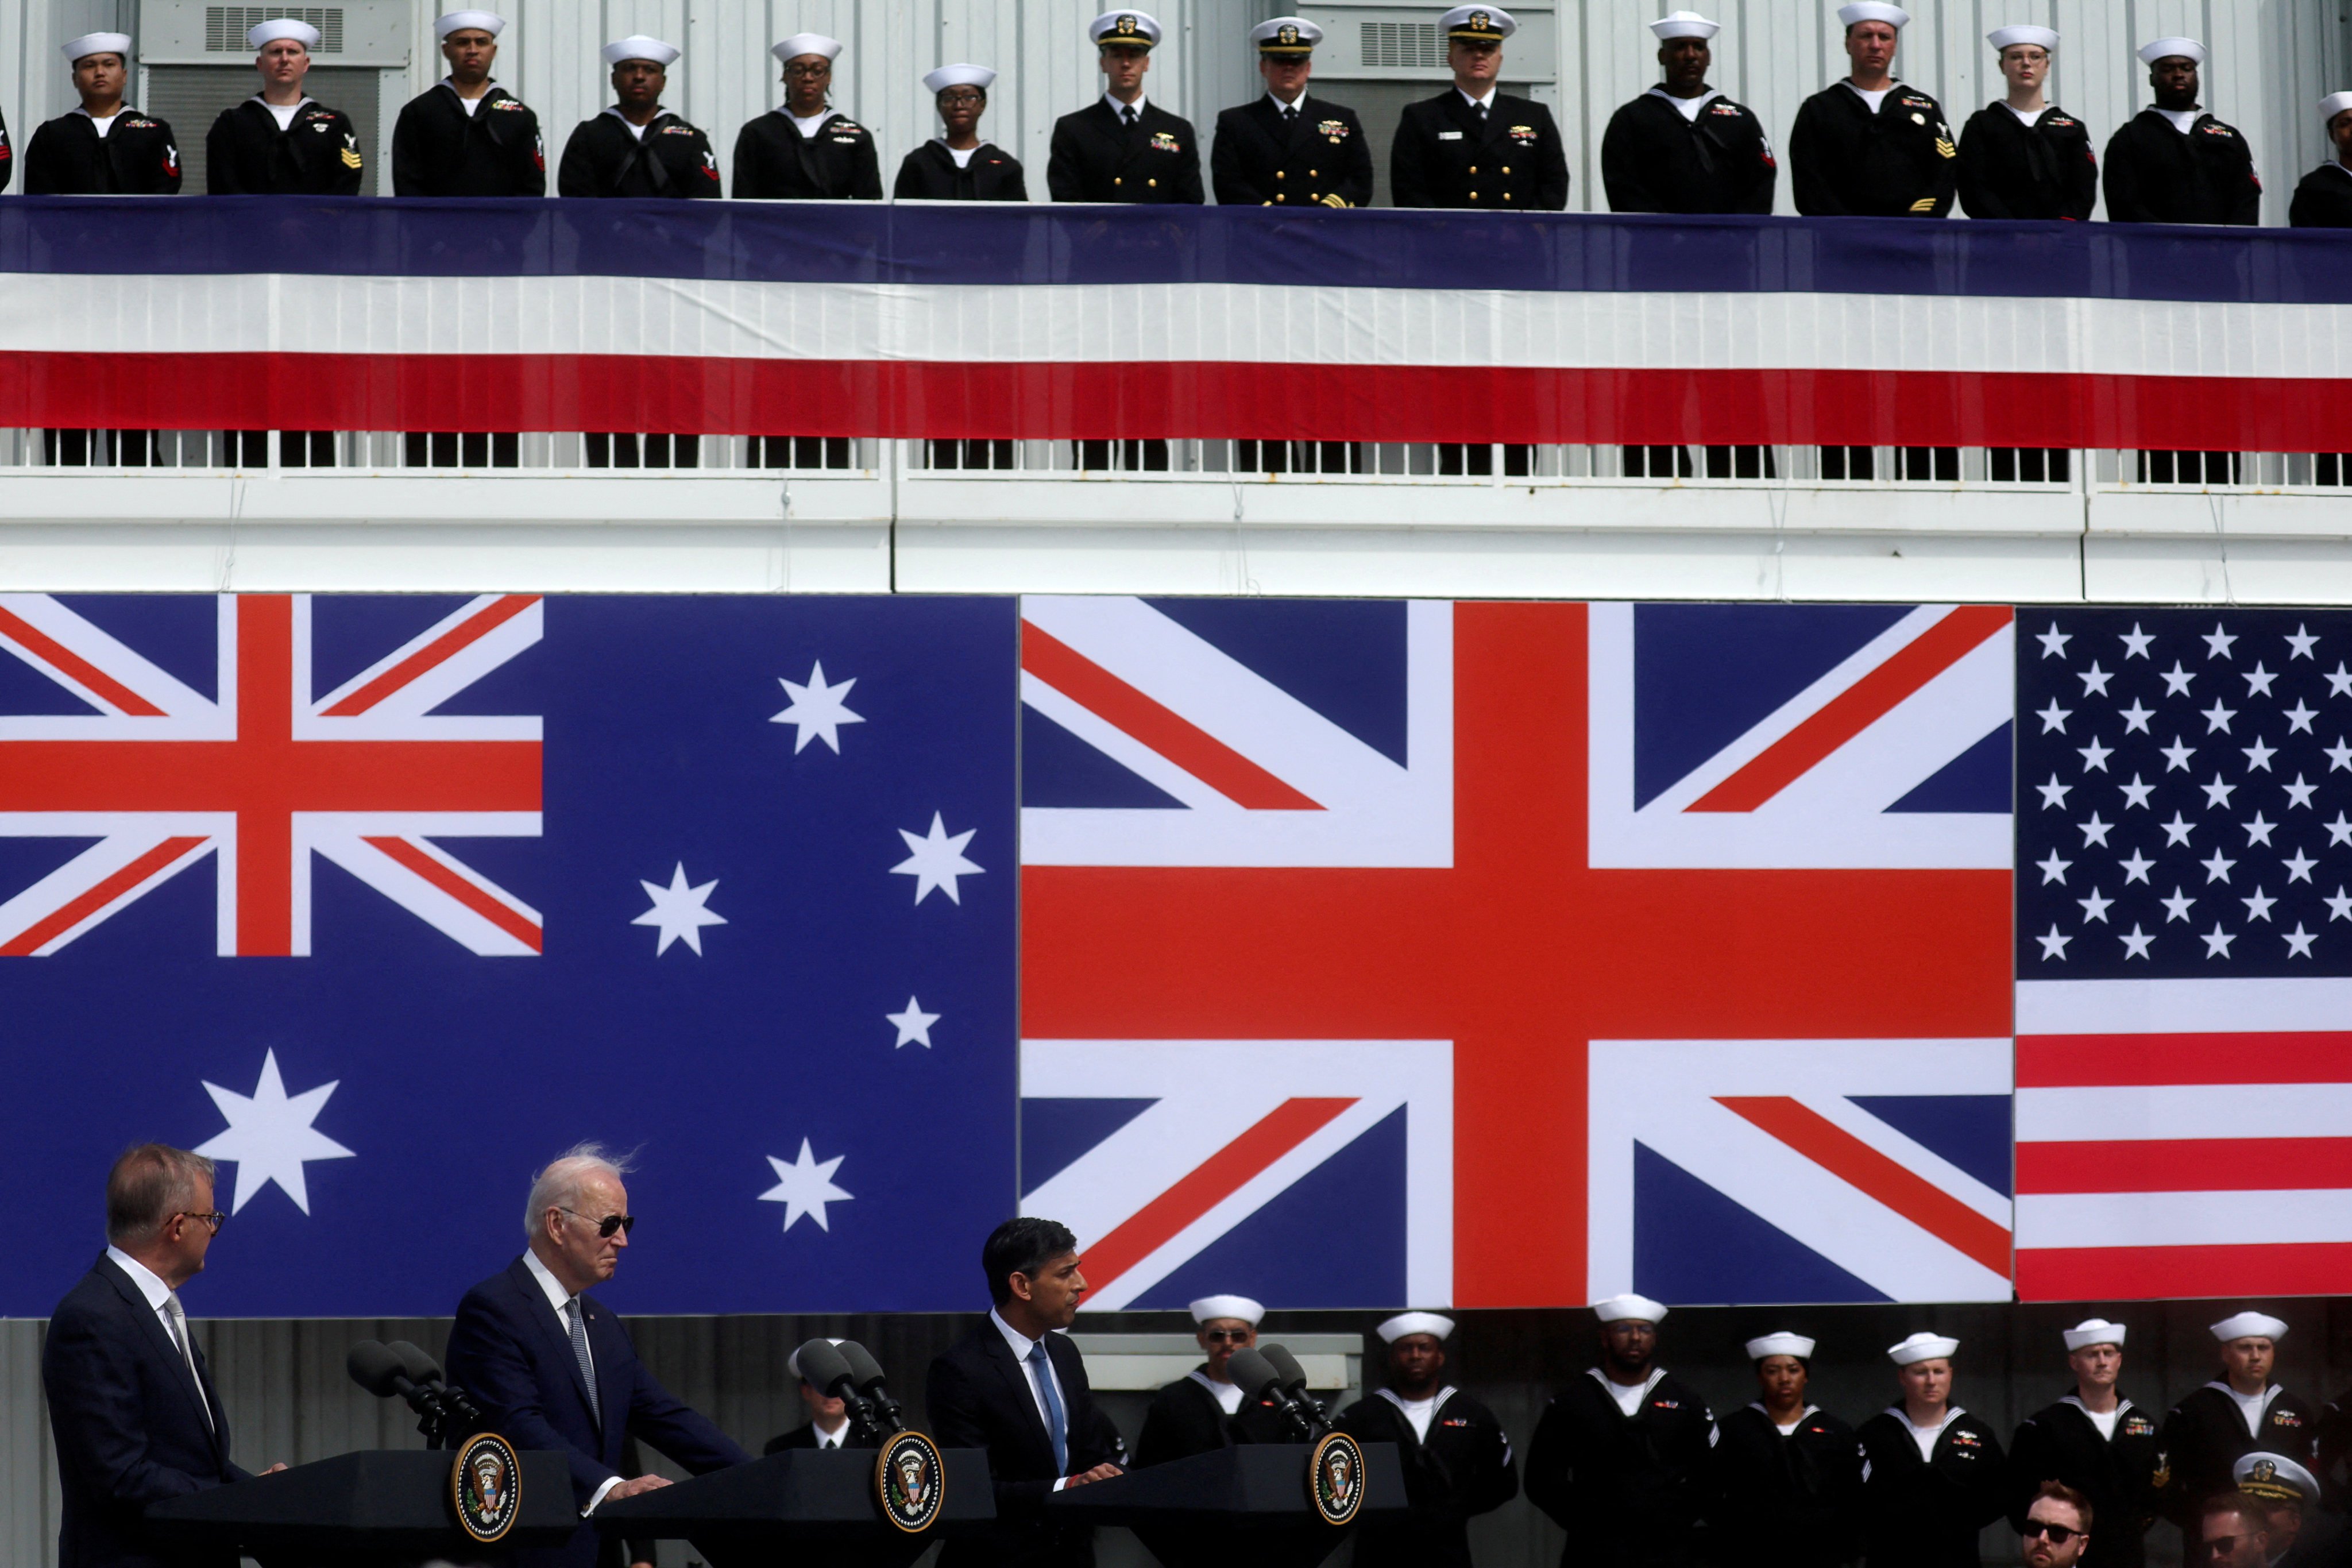 US President Joe Biden, Australian PM Anthony Albanese and British PM Rishi Sunak deliver remarks on the Australia-UK-US (AUKUS) partnership, after a meeting in San Diego on March 13, 2023. Photo: Reuters